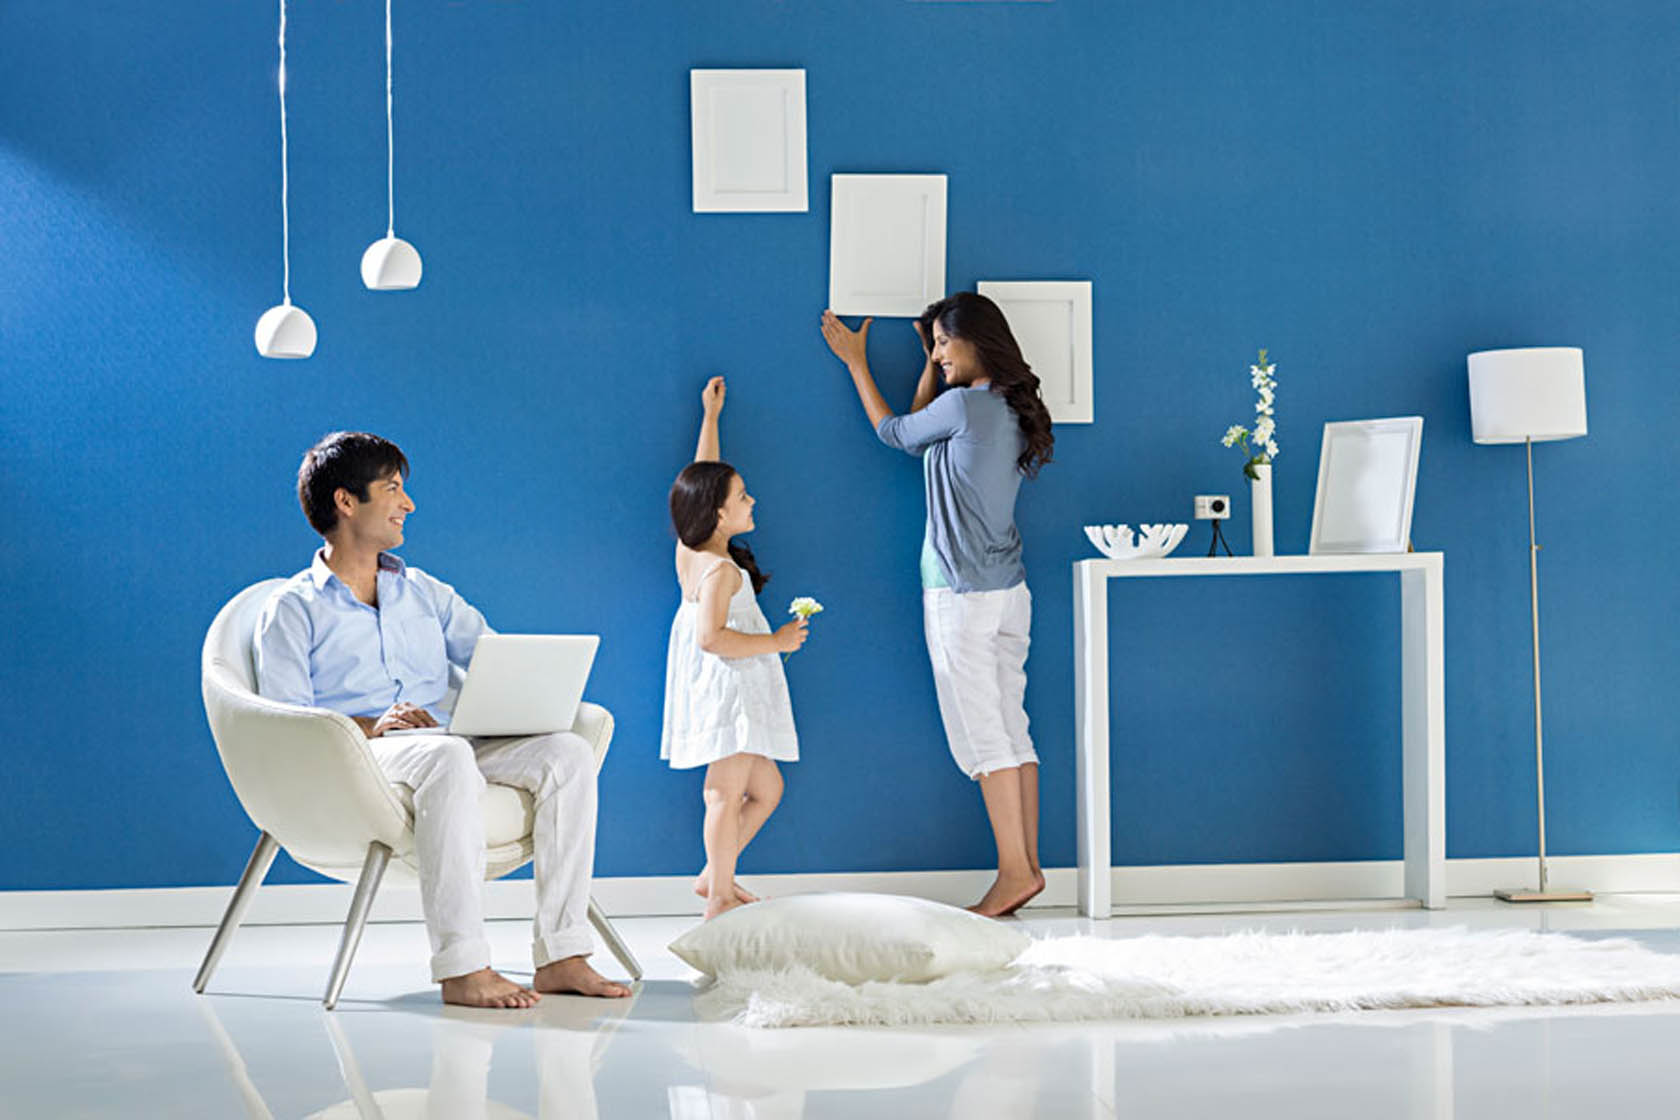 Design With Your Family In Mind